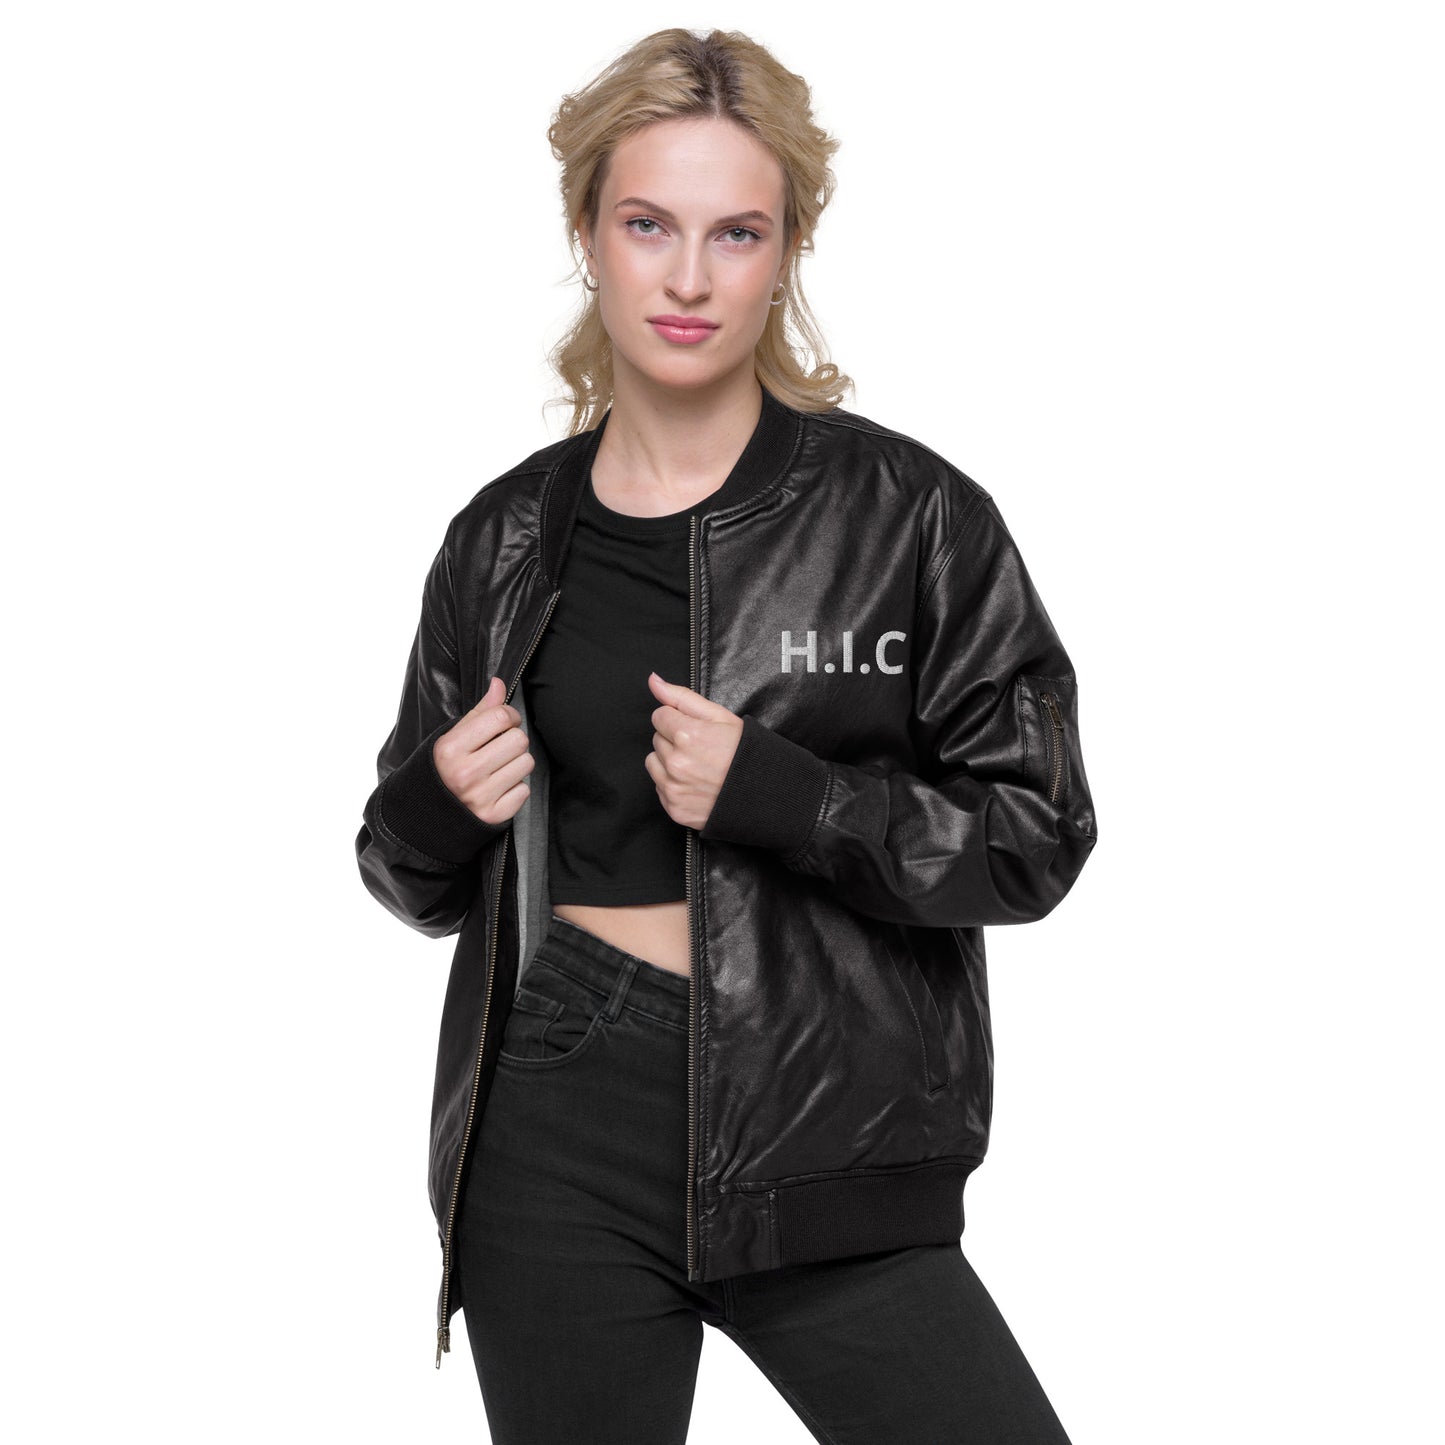 Zodiac Head In Charge Leather Bomber Jacket (Black)